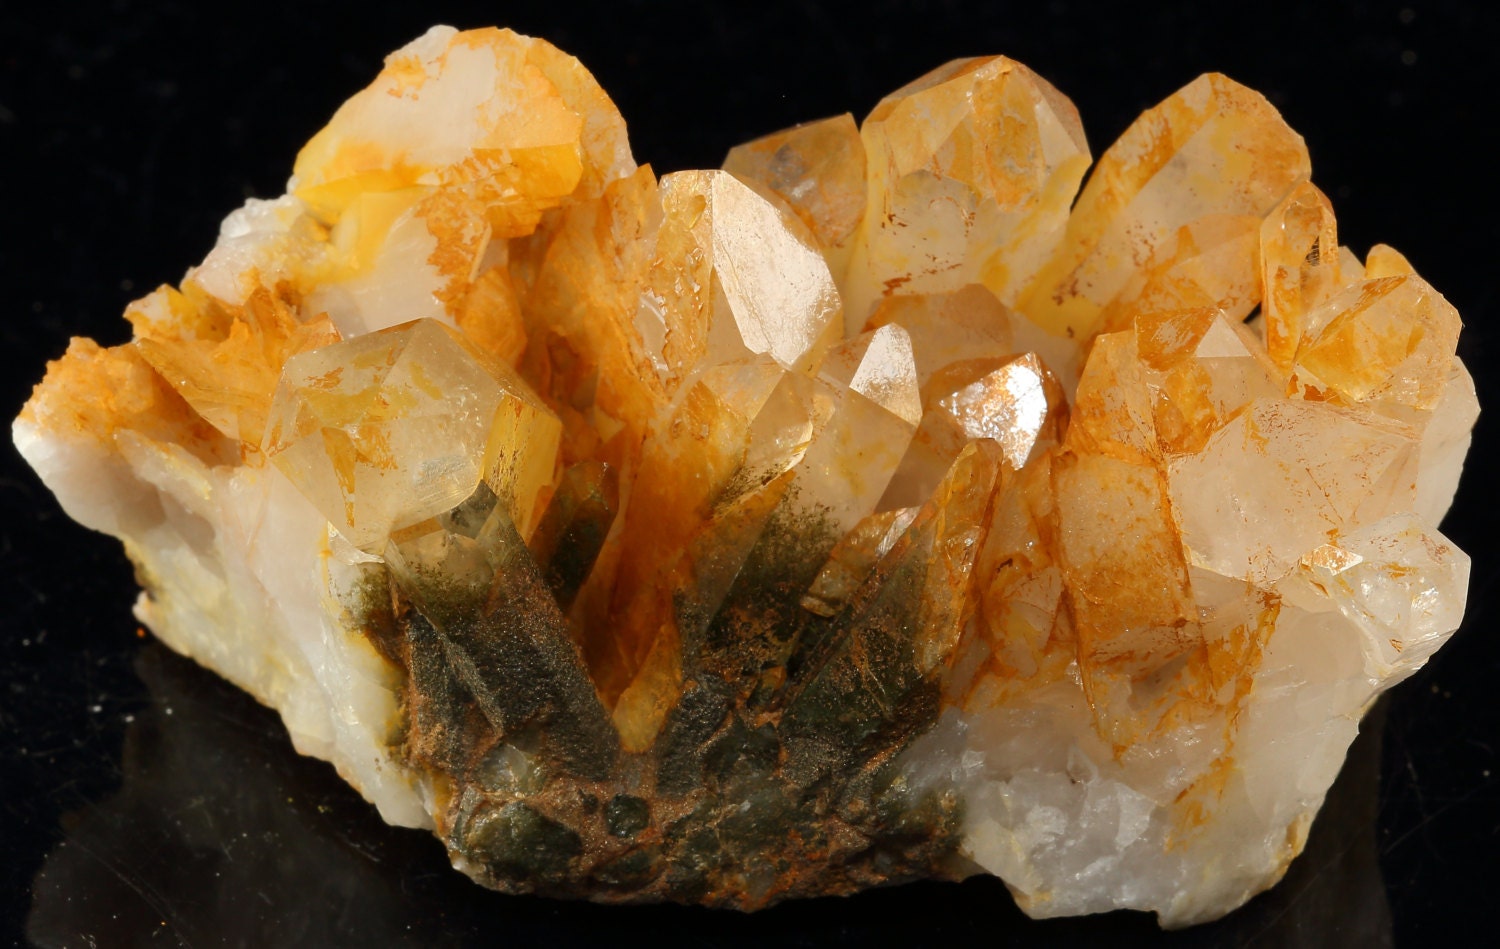 Limonite Stained Quartz Crystal Cluster With Chlorite